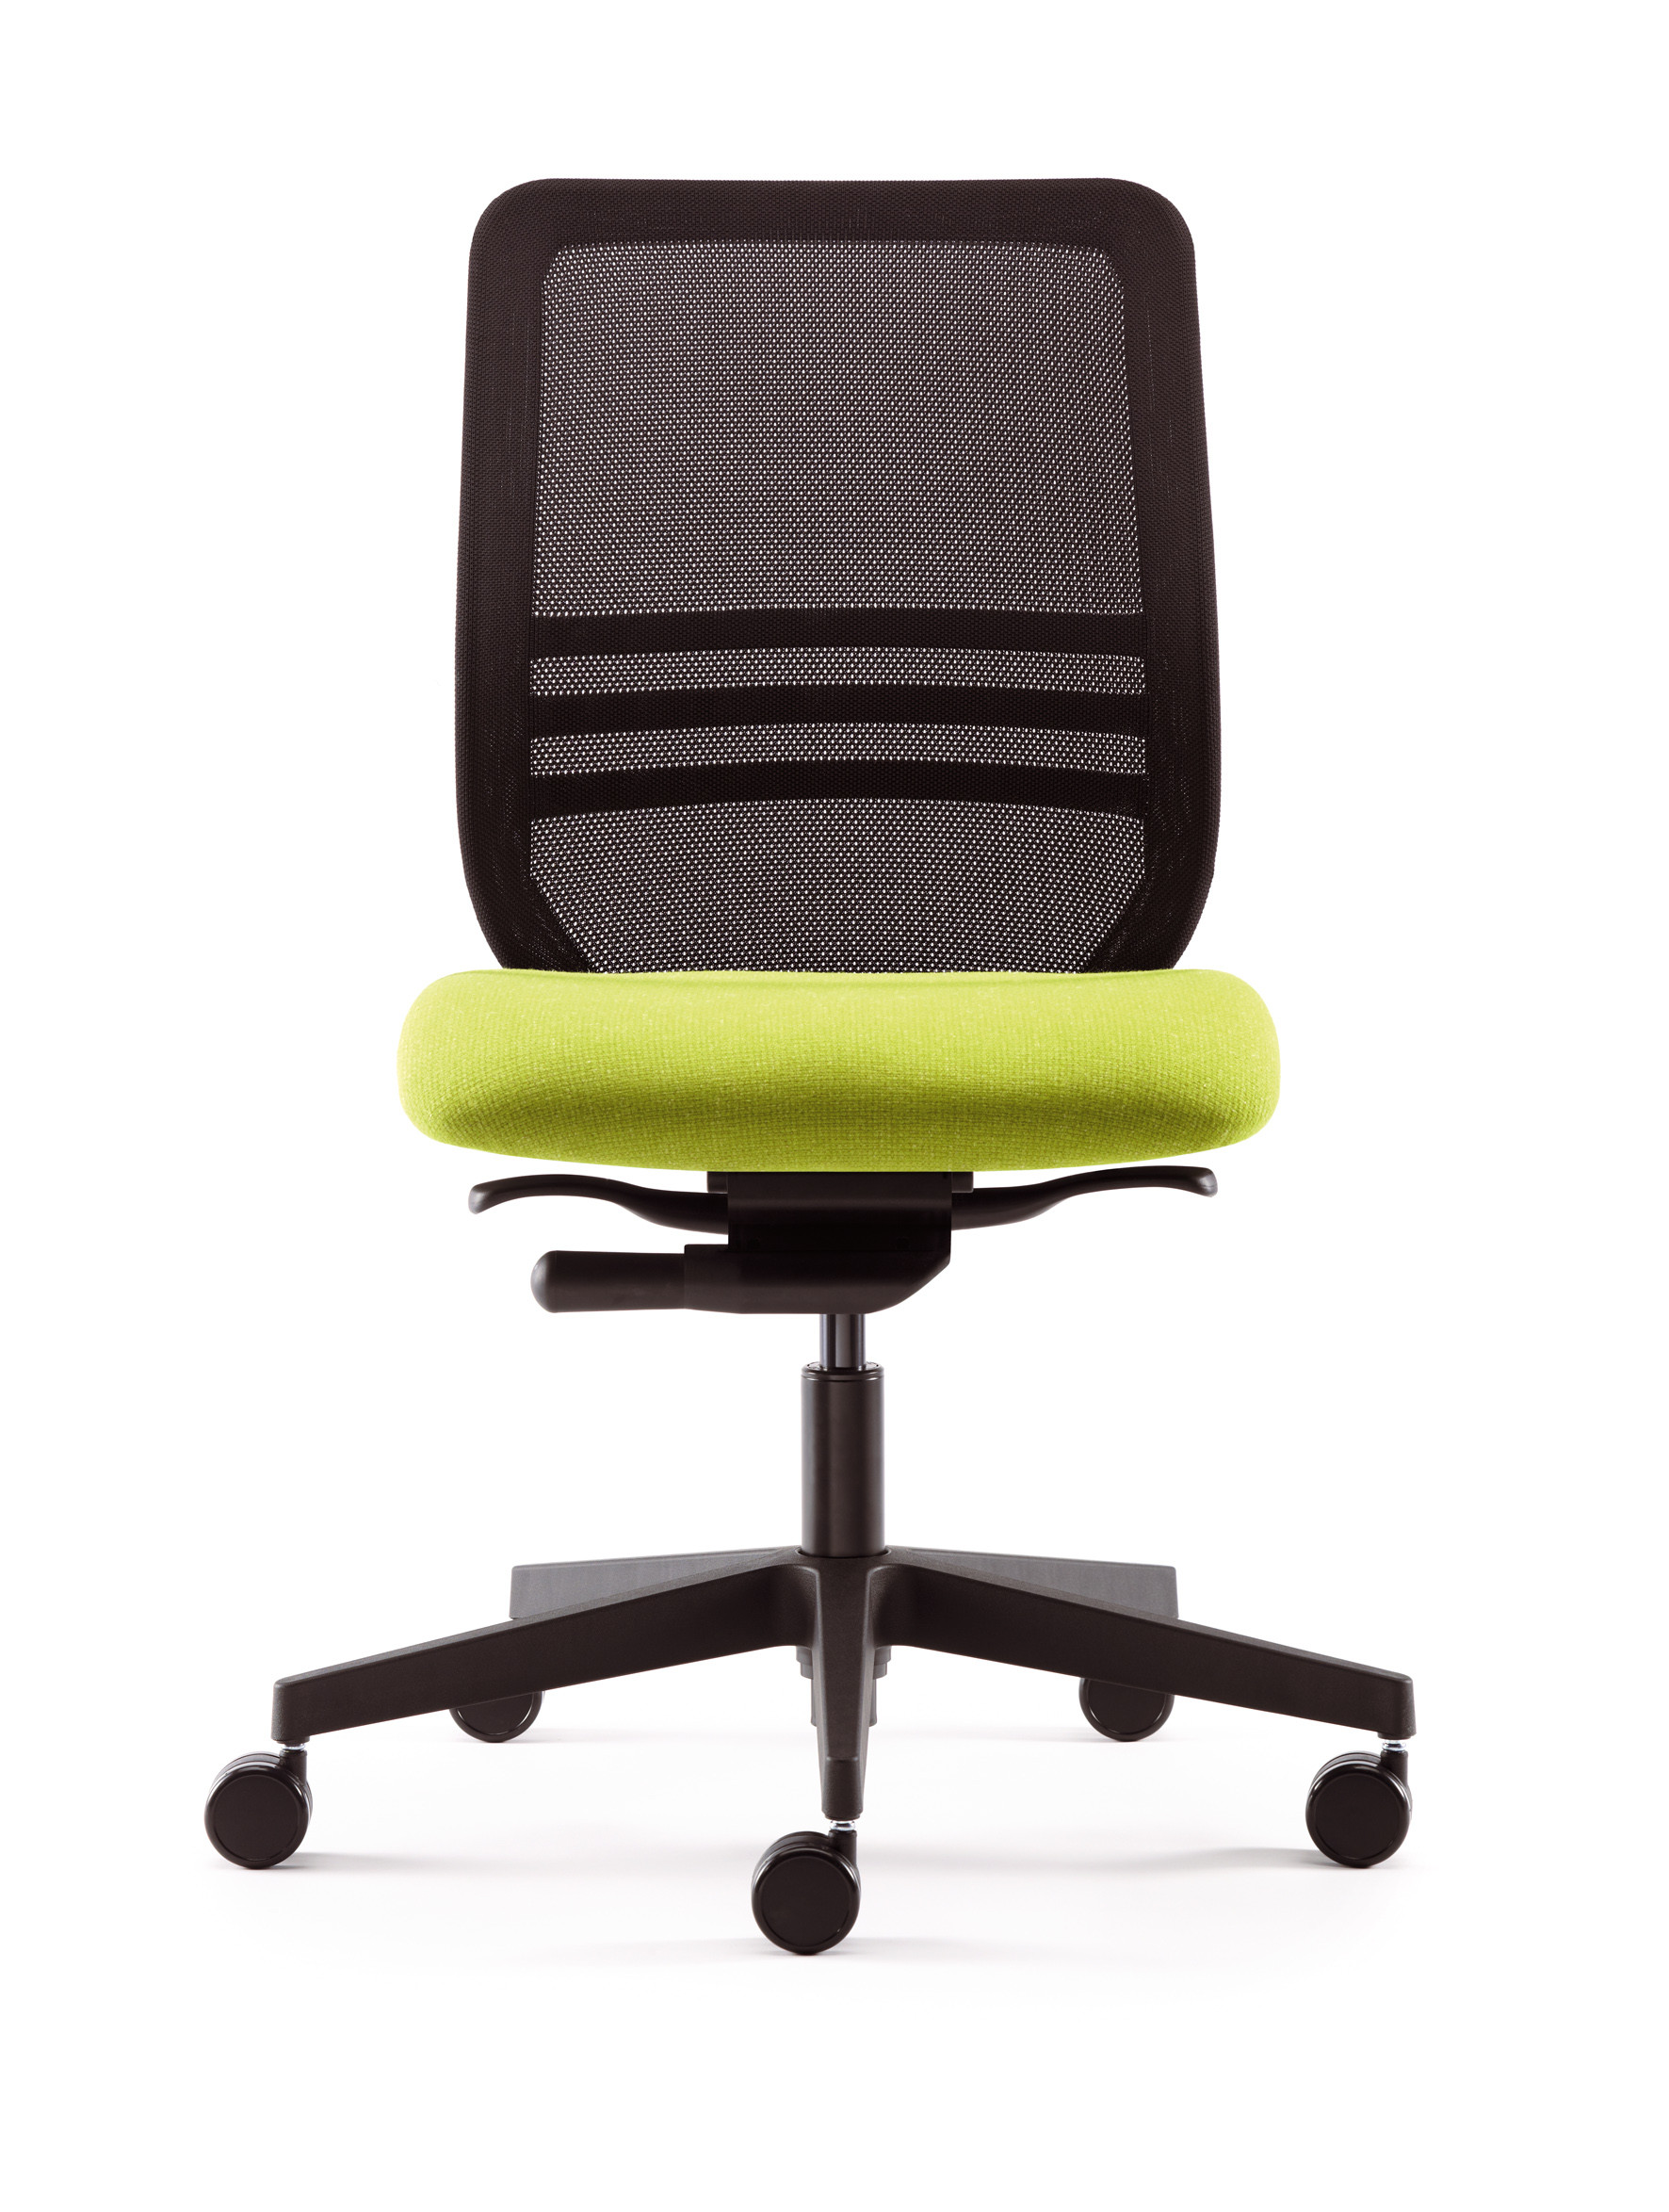 Bass Mesh Back Office Chair by Pledge